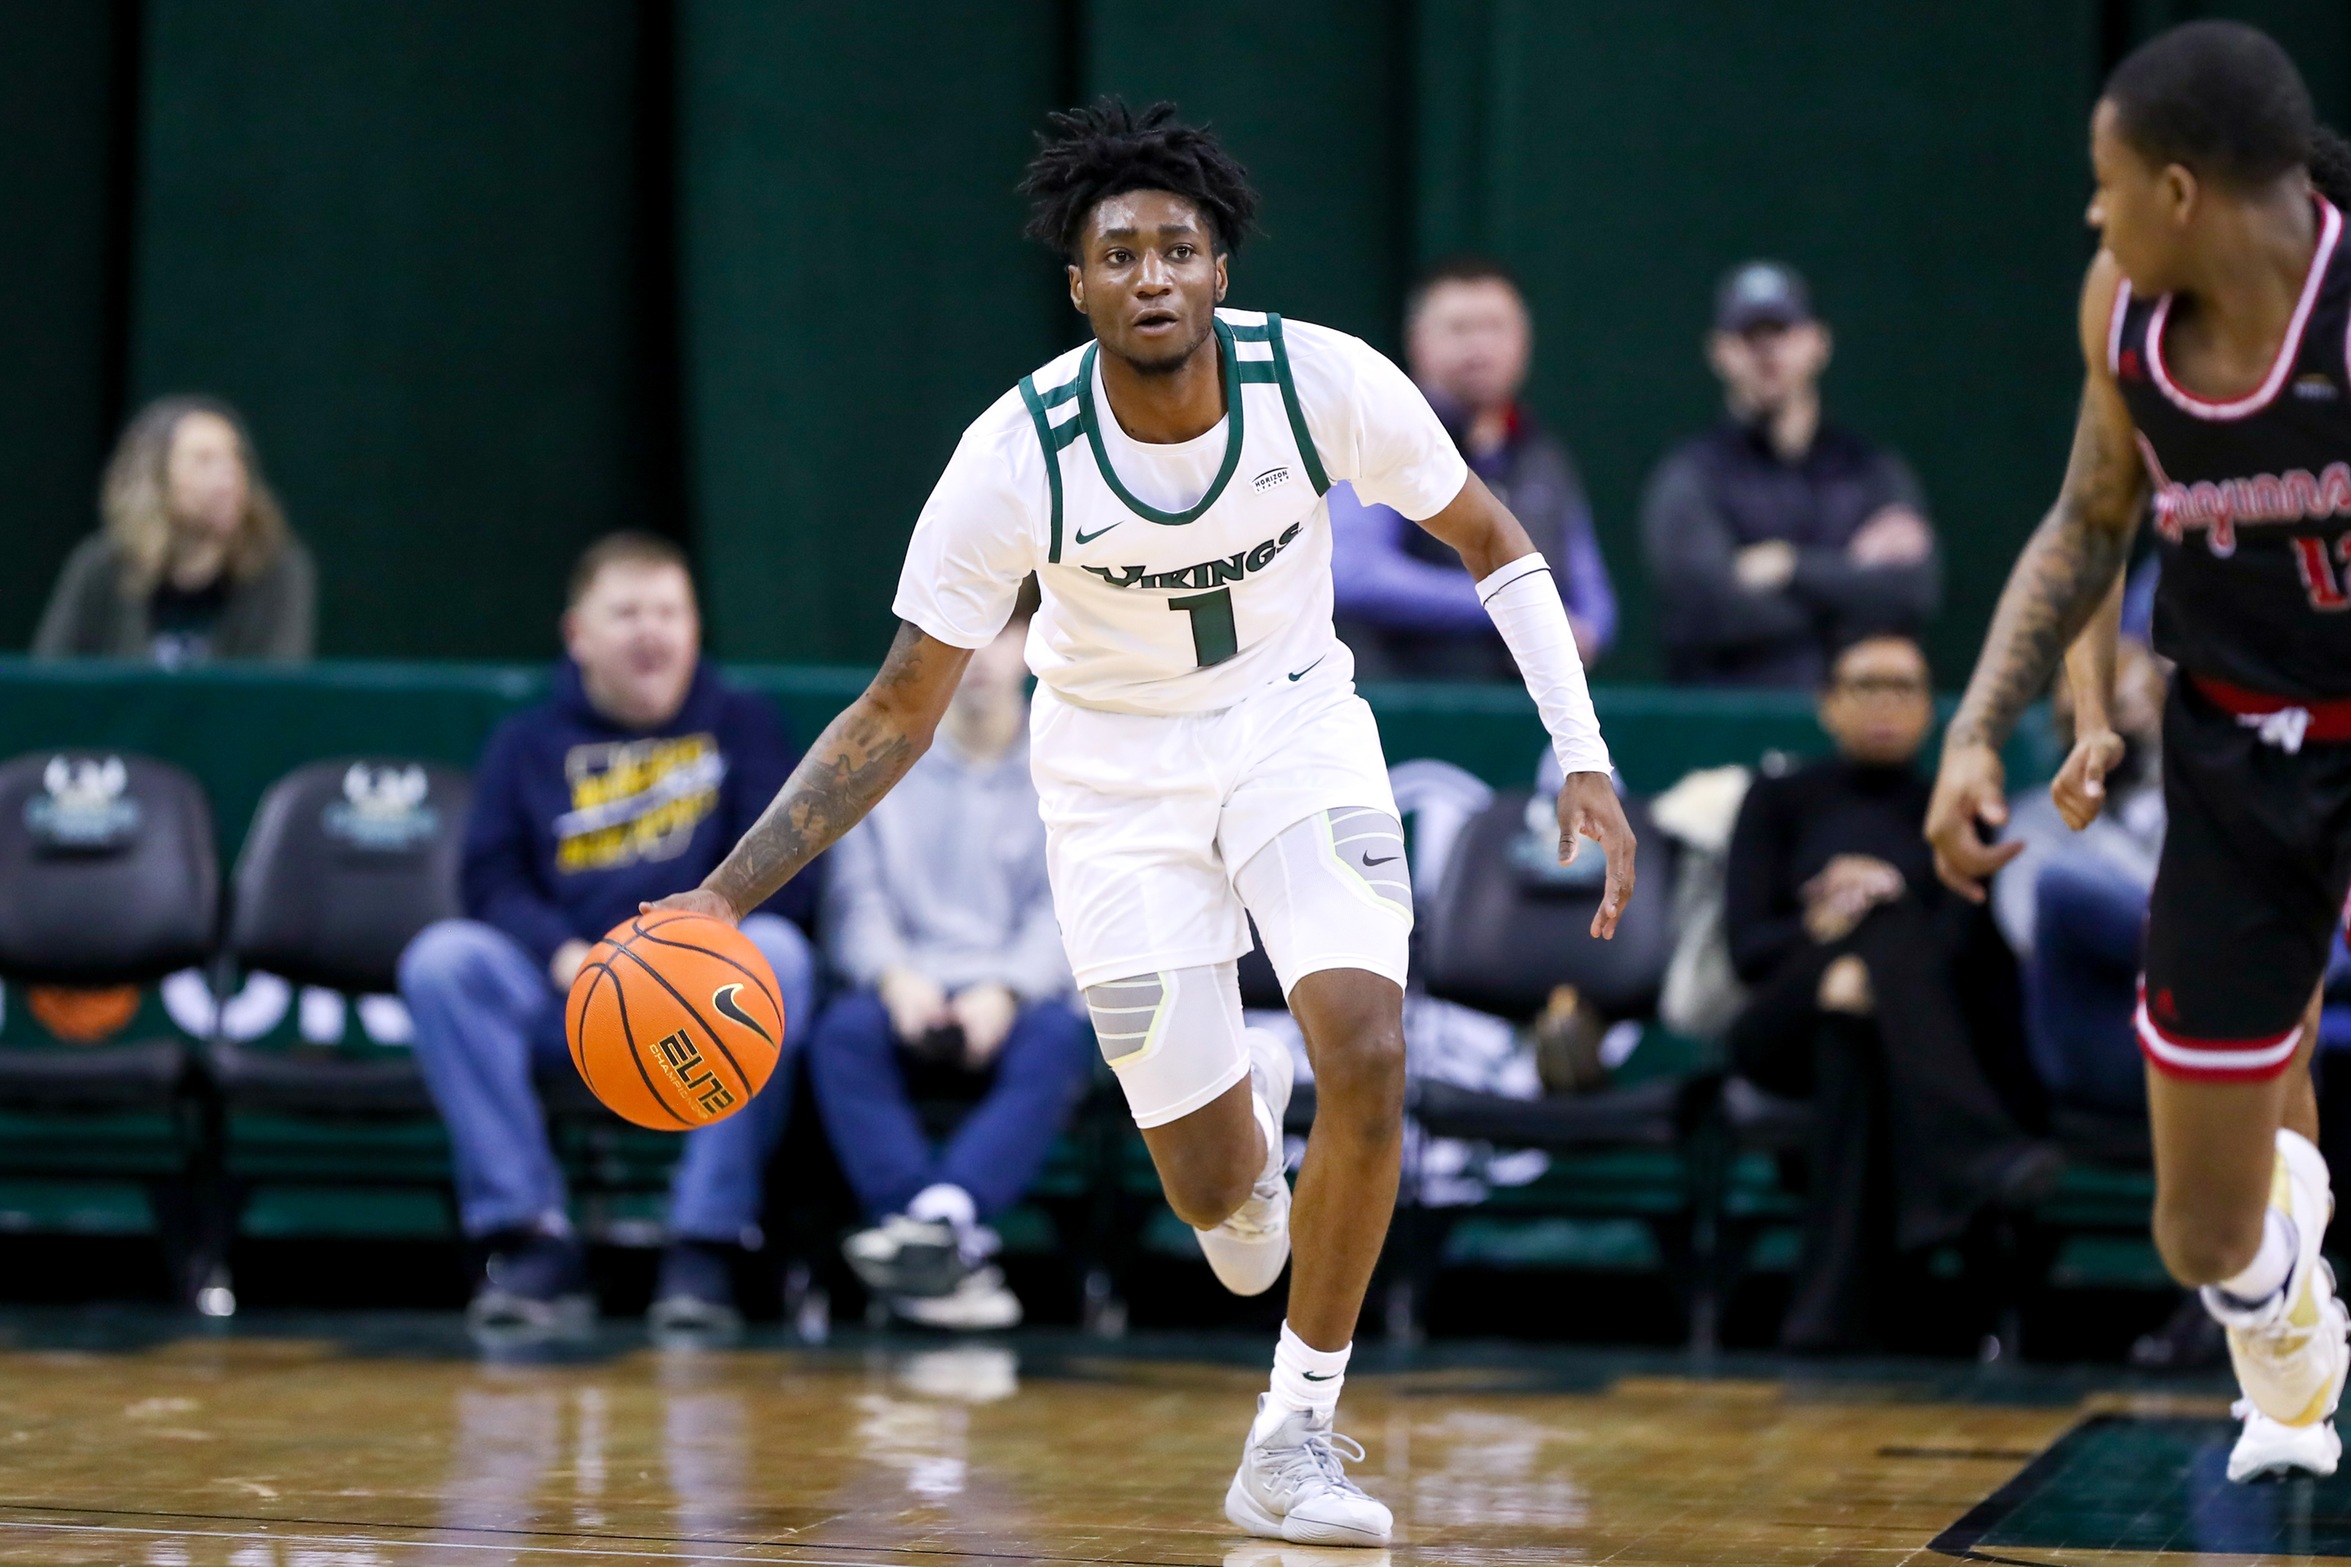 Cleveland State Men’s Basketball Earns Share of First Place with Win over IUPUI